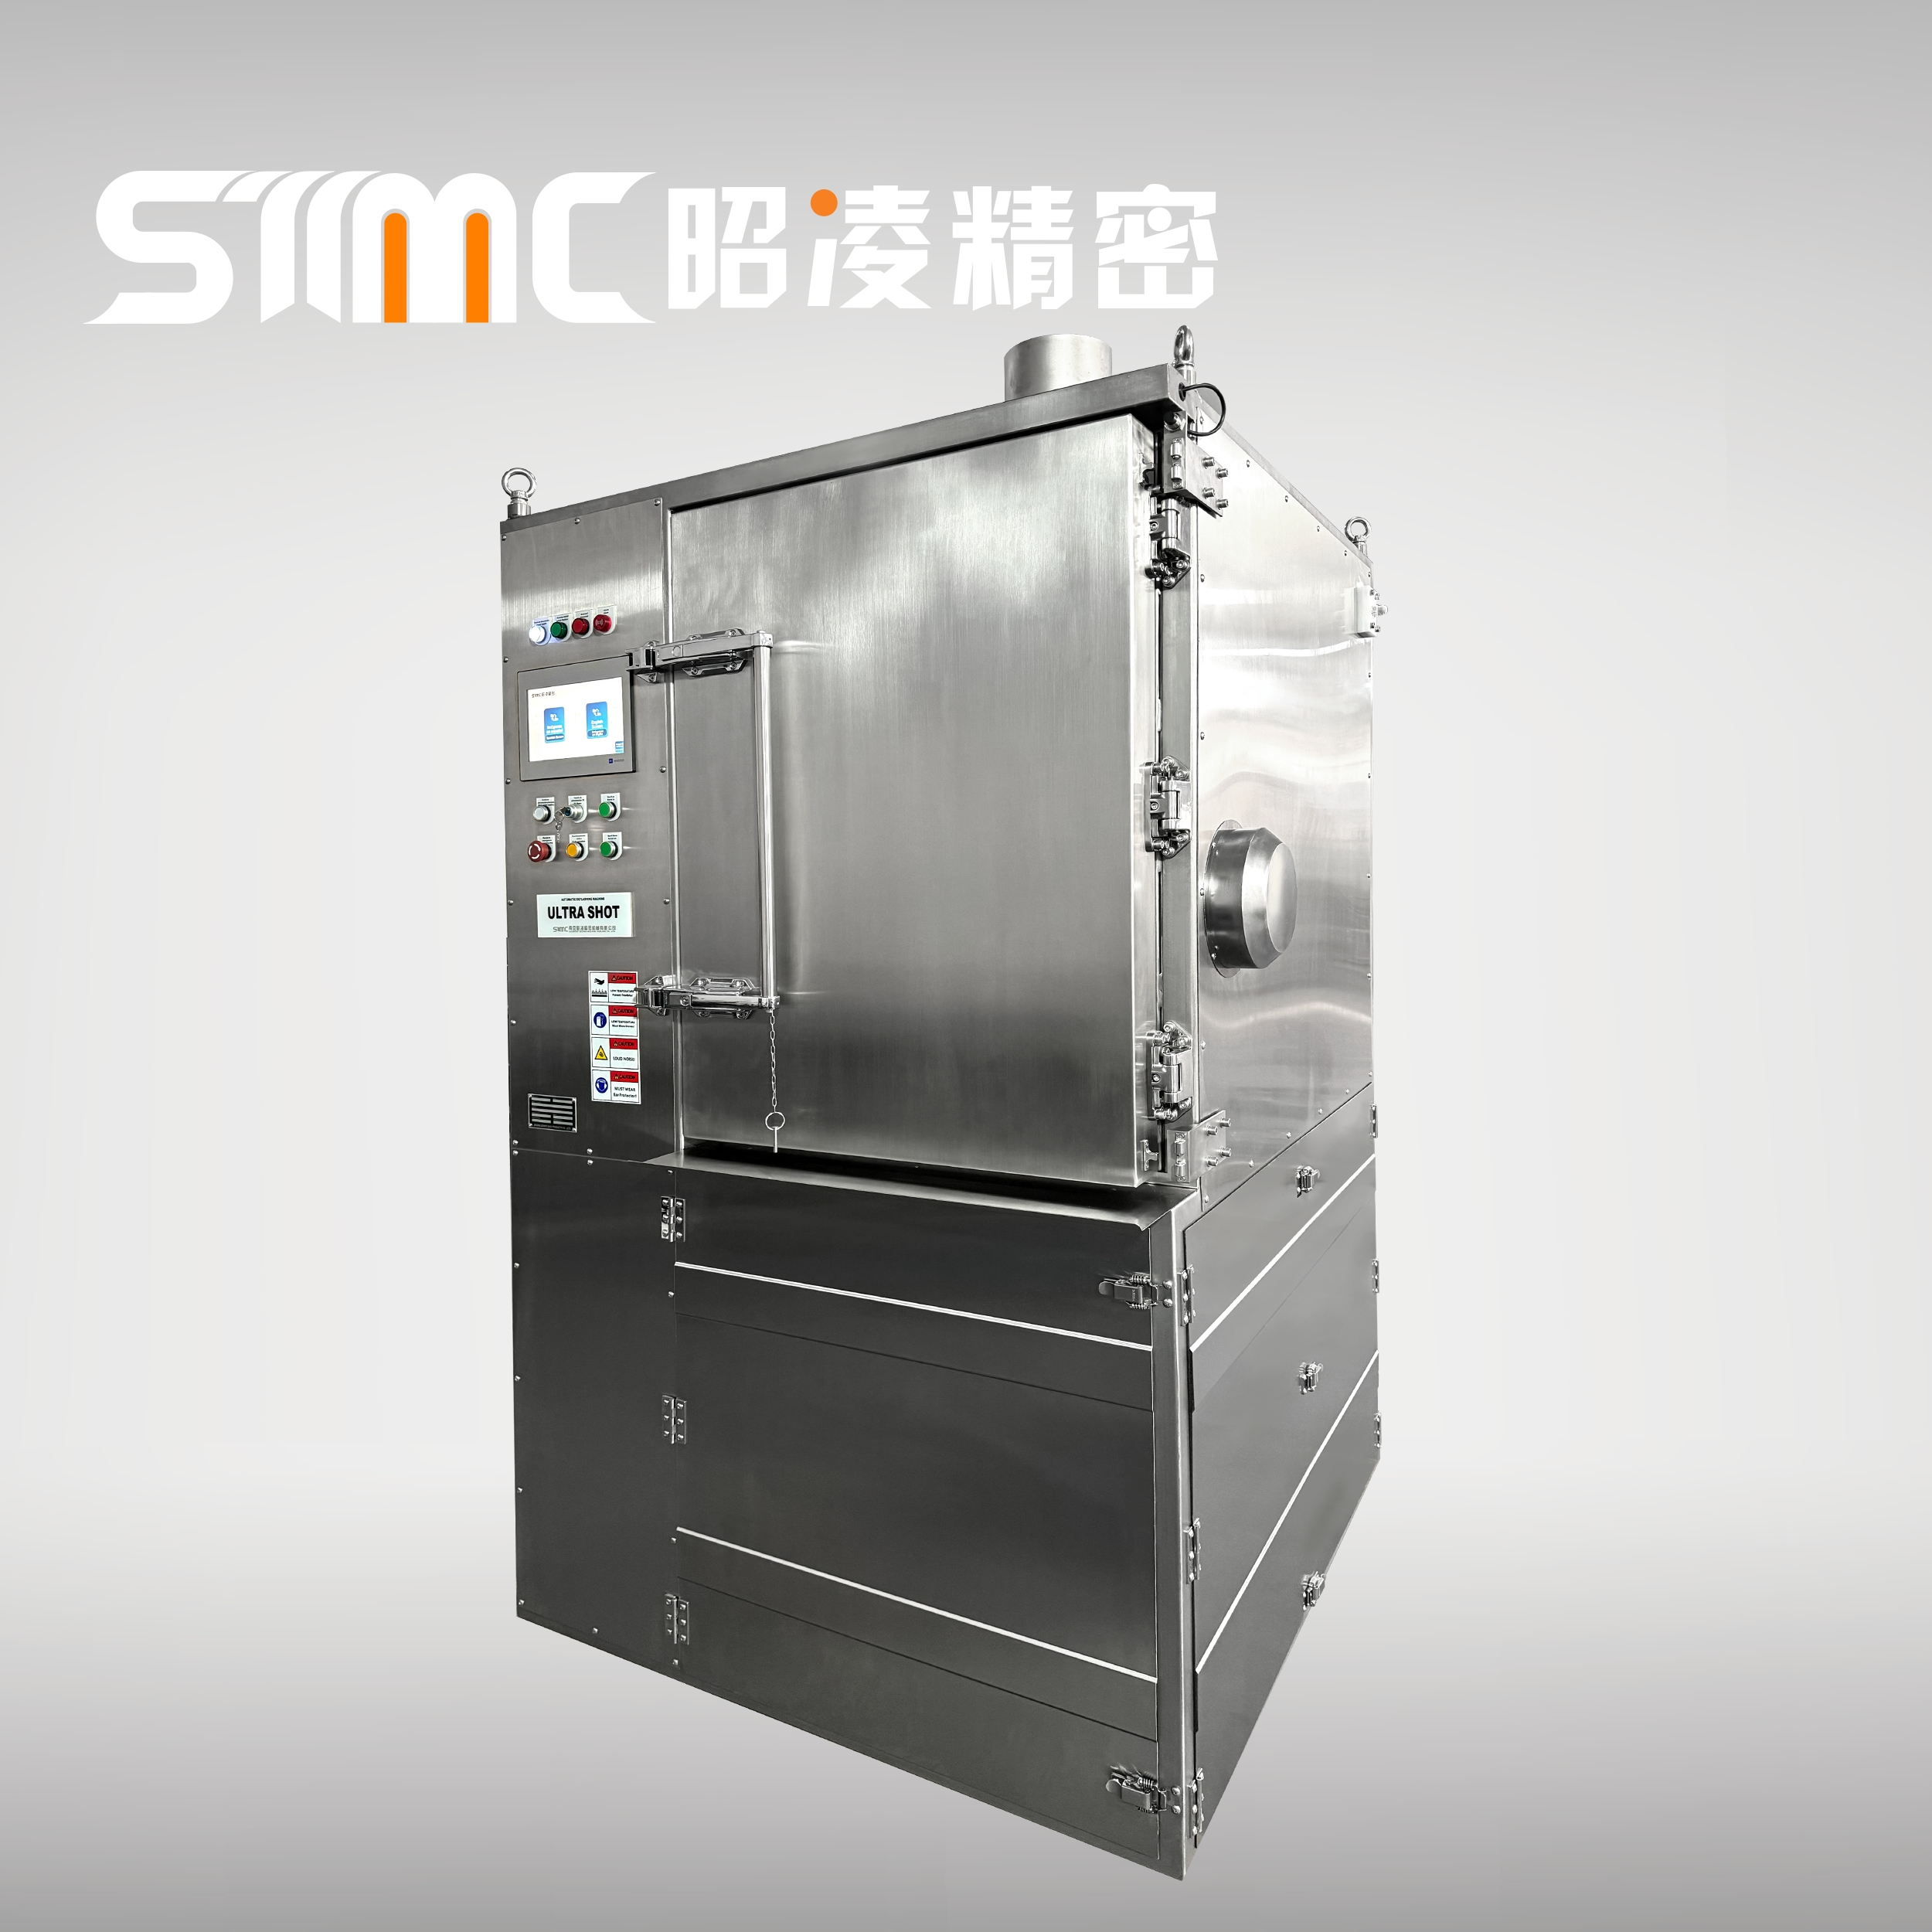 Ultra Shot NS-120T Cryogenic Deflashing/Deburring Machine for Rubber, Polyurethane, Silicone, Plastic, Die-casting and Metal Alloy Products